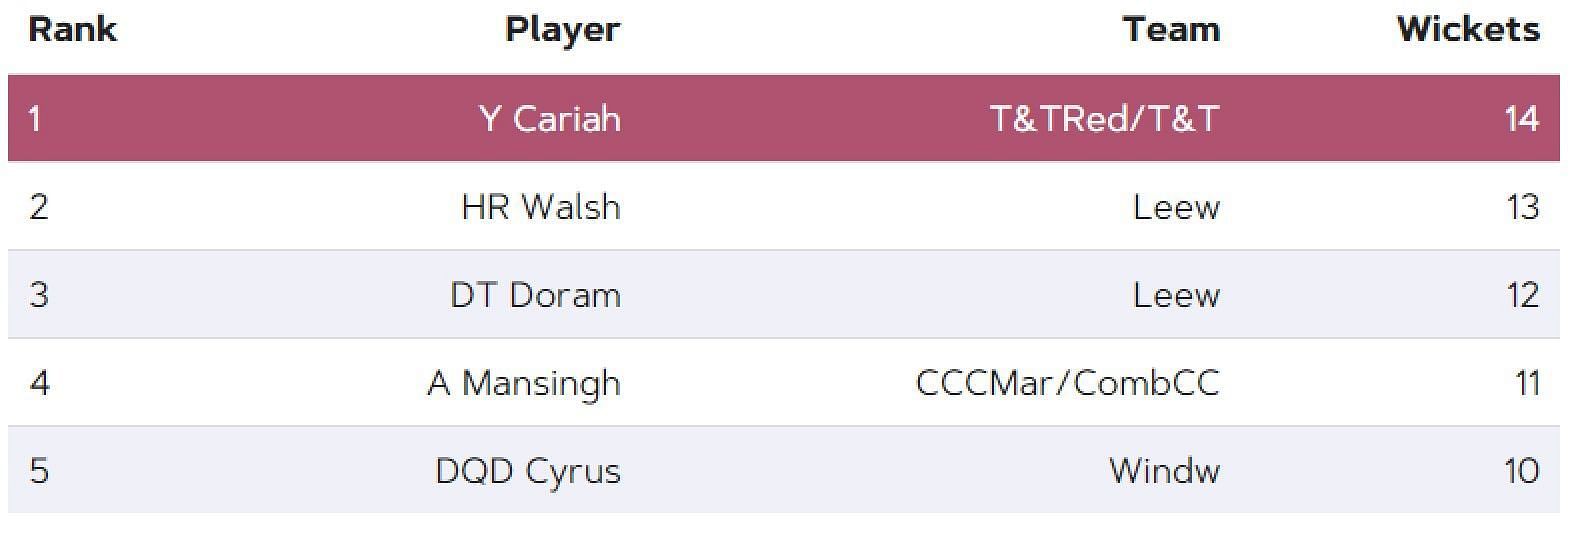 Most Wickets list after Match 21 (Image Courtesy: www.windiescricket.com)